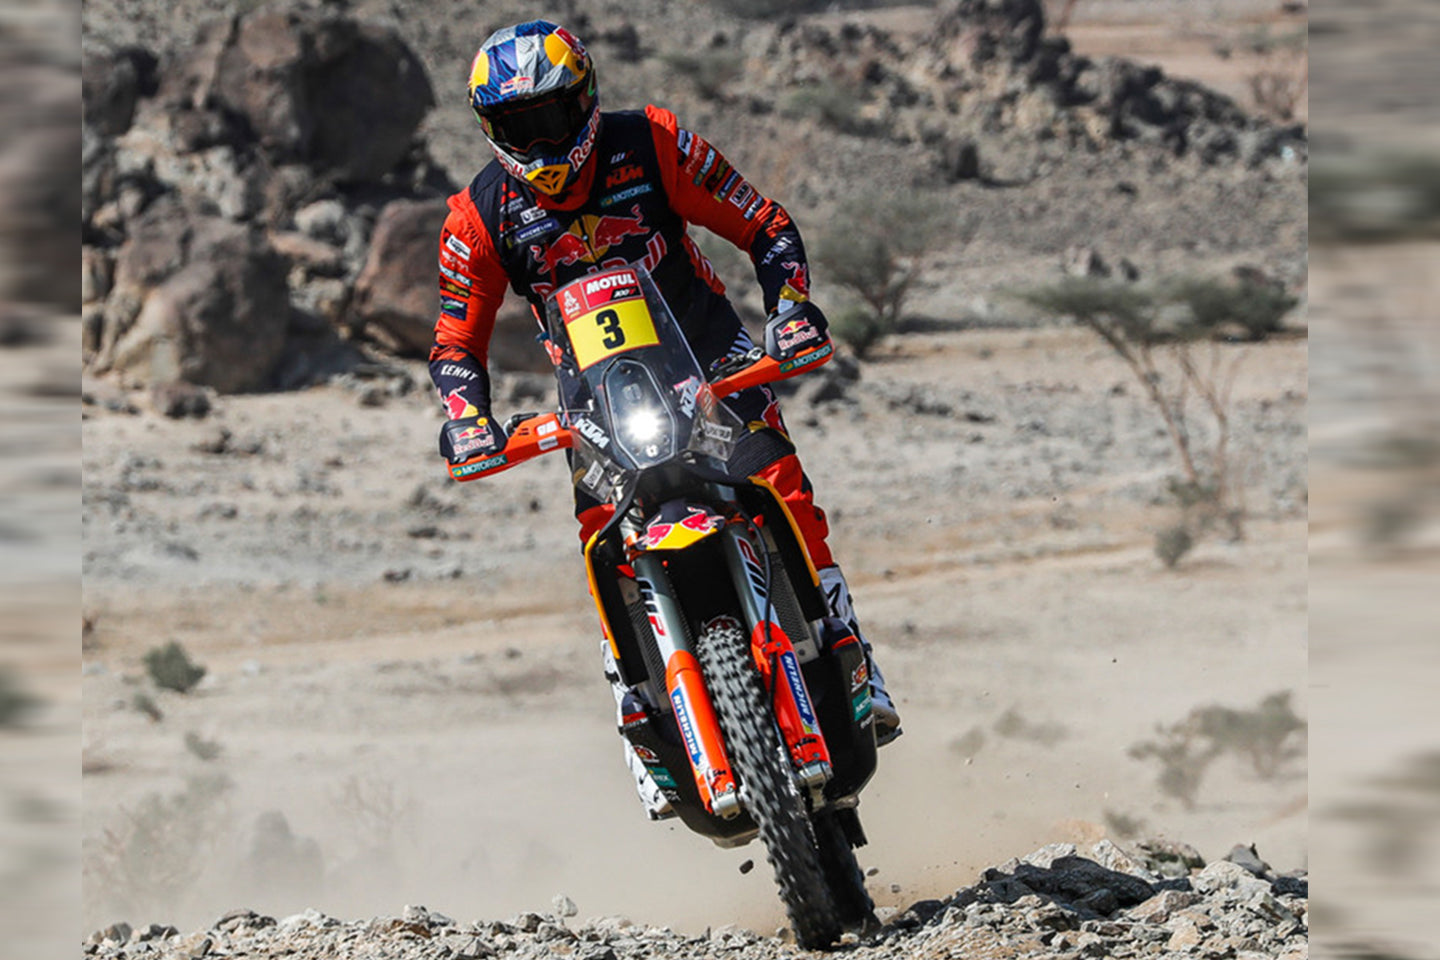 TOBY PRICE STORMS TO STAGE ONE VICTORY AT DAKAR 2021